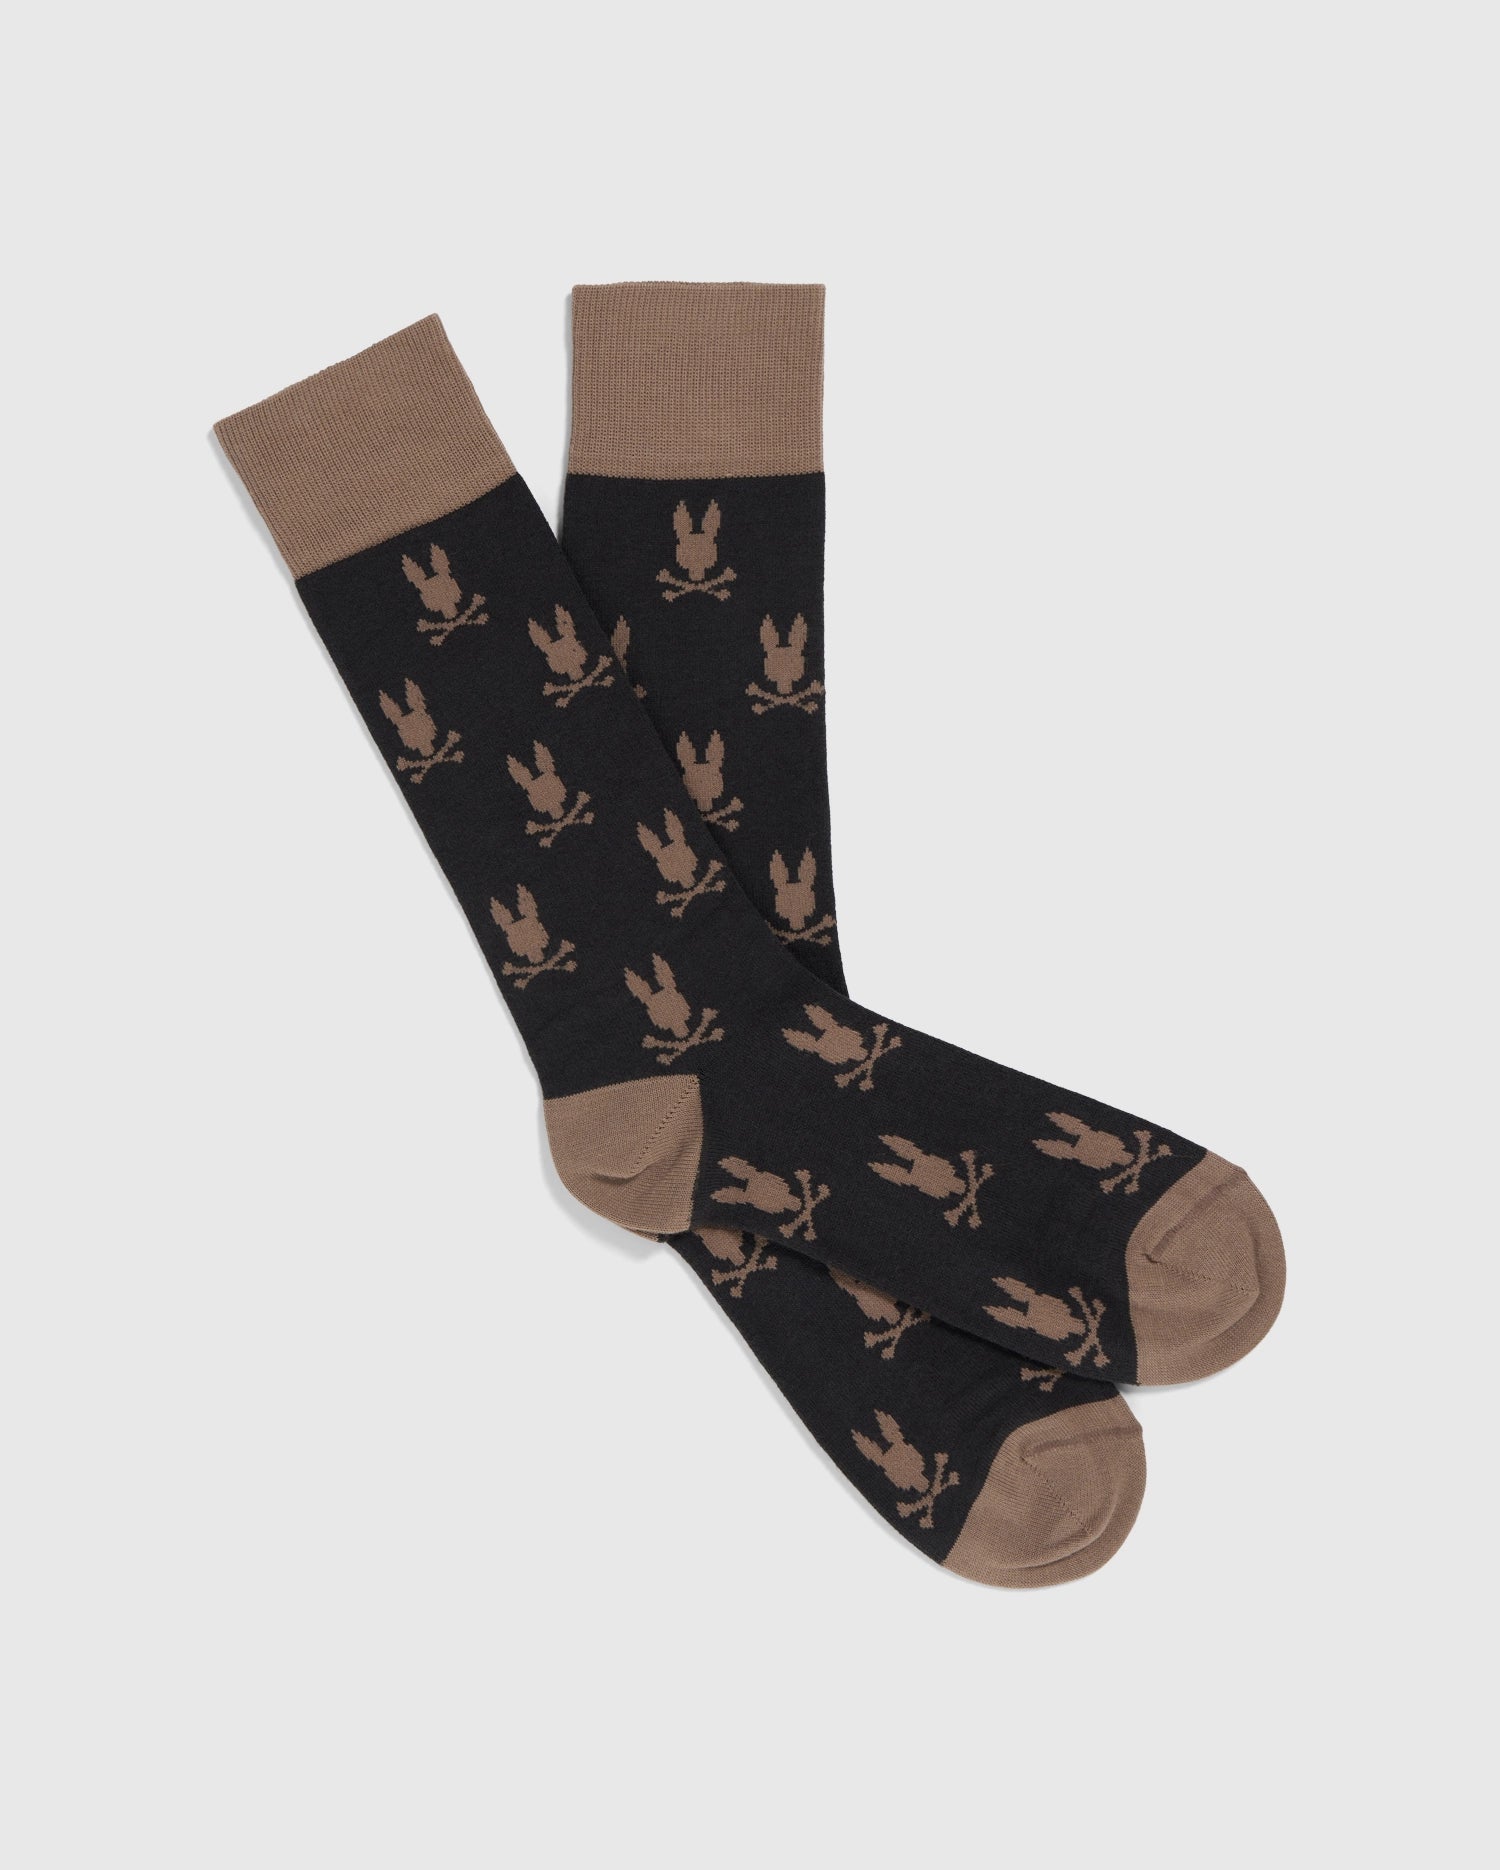 A pair of black MENS DRESS SOCK - B6F750B2SO by Psycho Bunny, made in Peru, with brown cuffs, heels, and toes. The Peruvian Pima cotton socks feature a repeating pattern of brown eagle silhouettes.